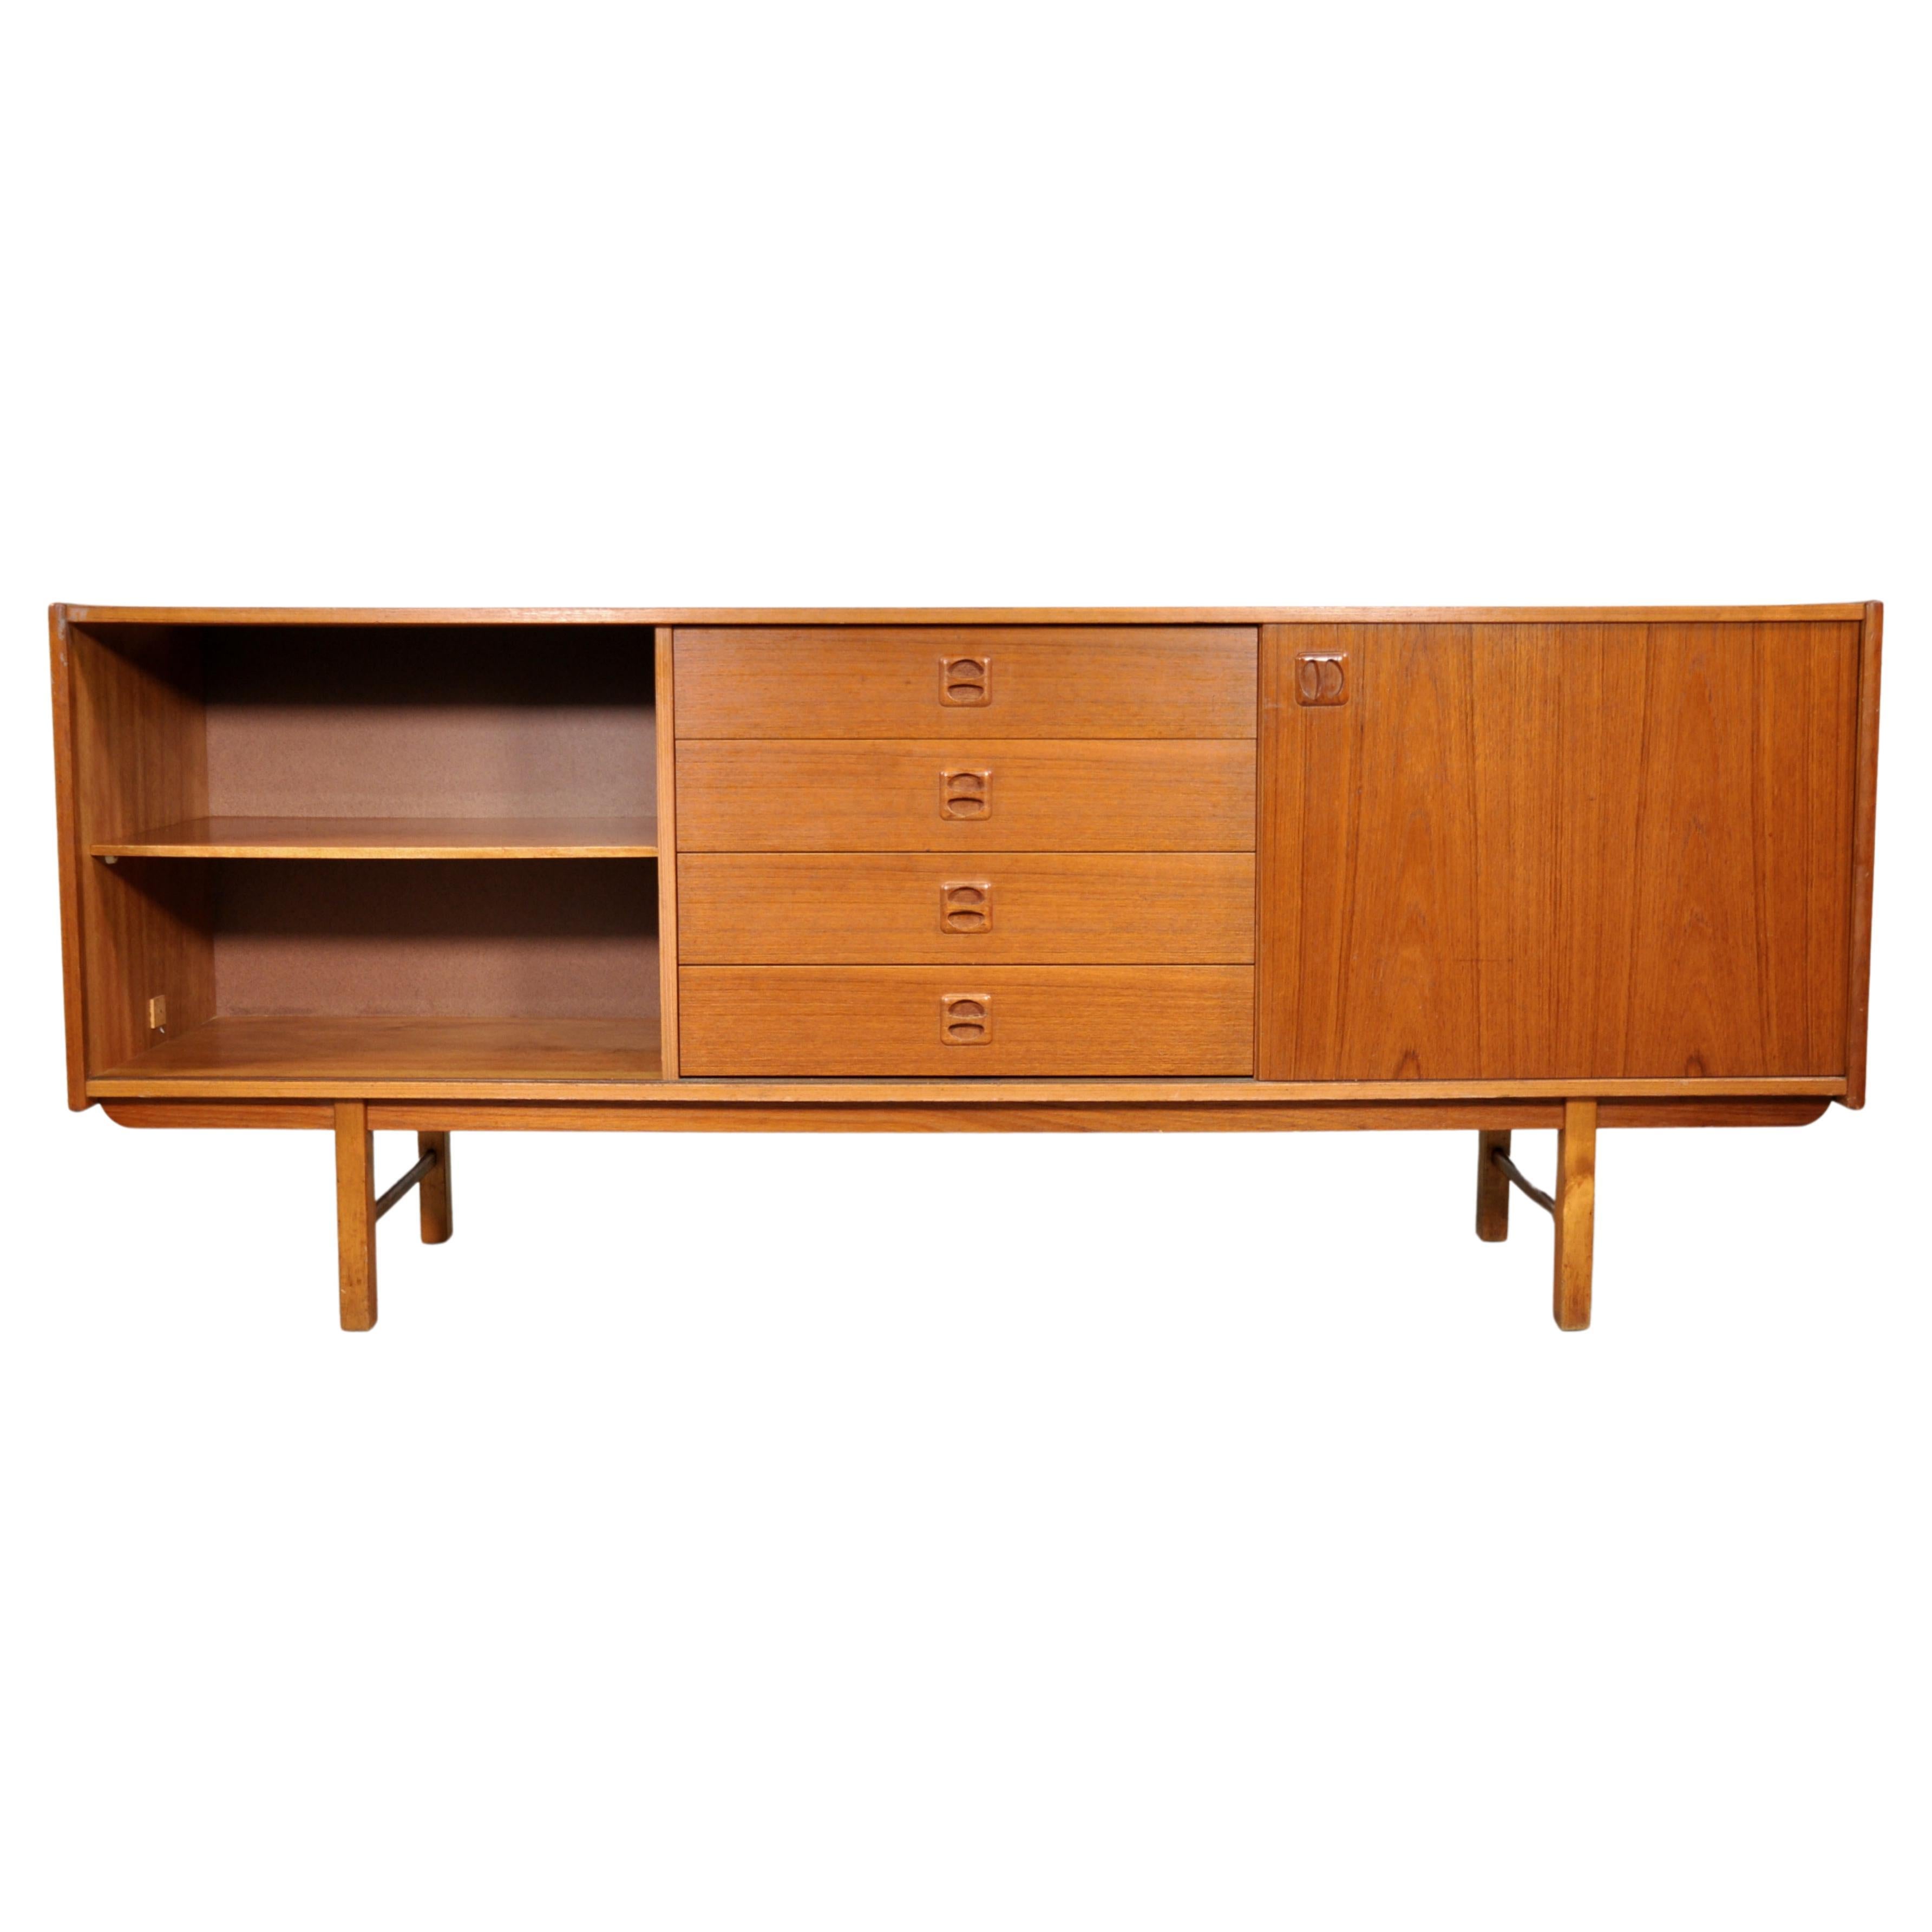 Vintage Swedish Modern teak bar cabinet dating from the 1960s. The sideboard features a central column with four drawers with sculpted teak pulls, flanked by a sliding door (originally two doors) opening to a cabinet space fitted with a shelf that